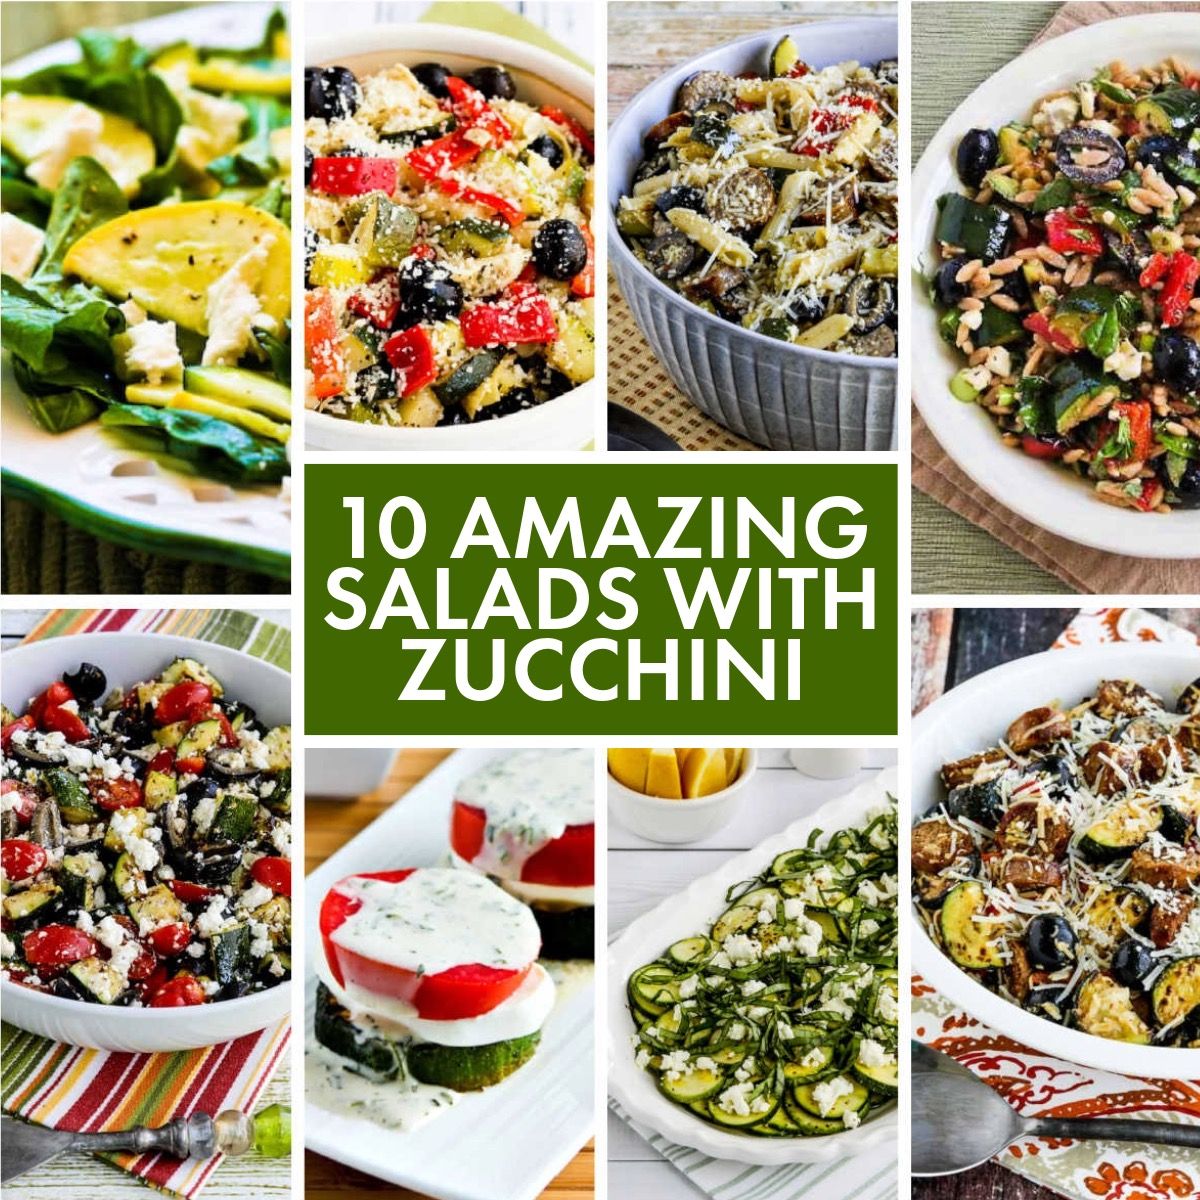 Ten Amazing Salads with Zucchini collage image with text overlay showing featured recipes.